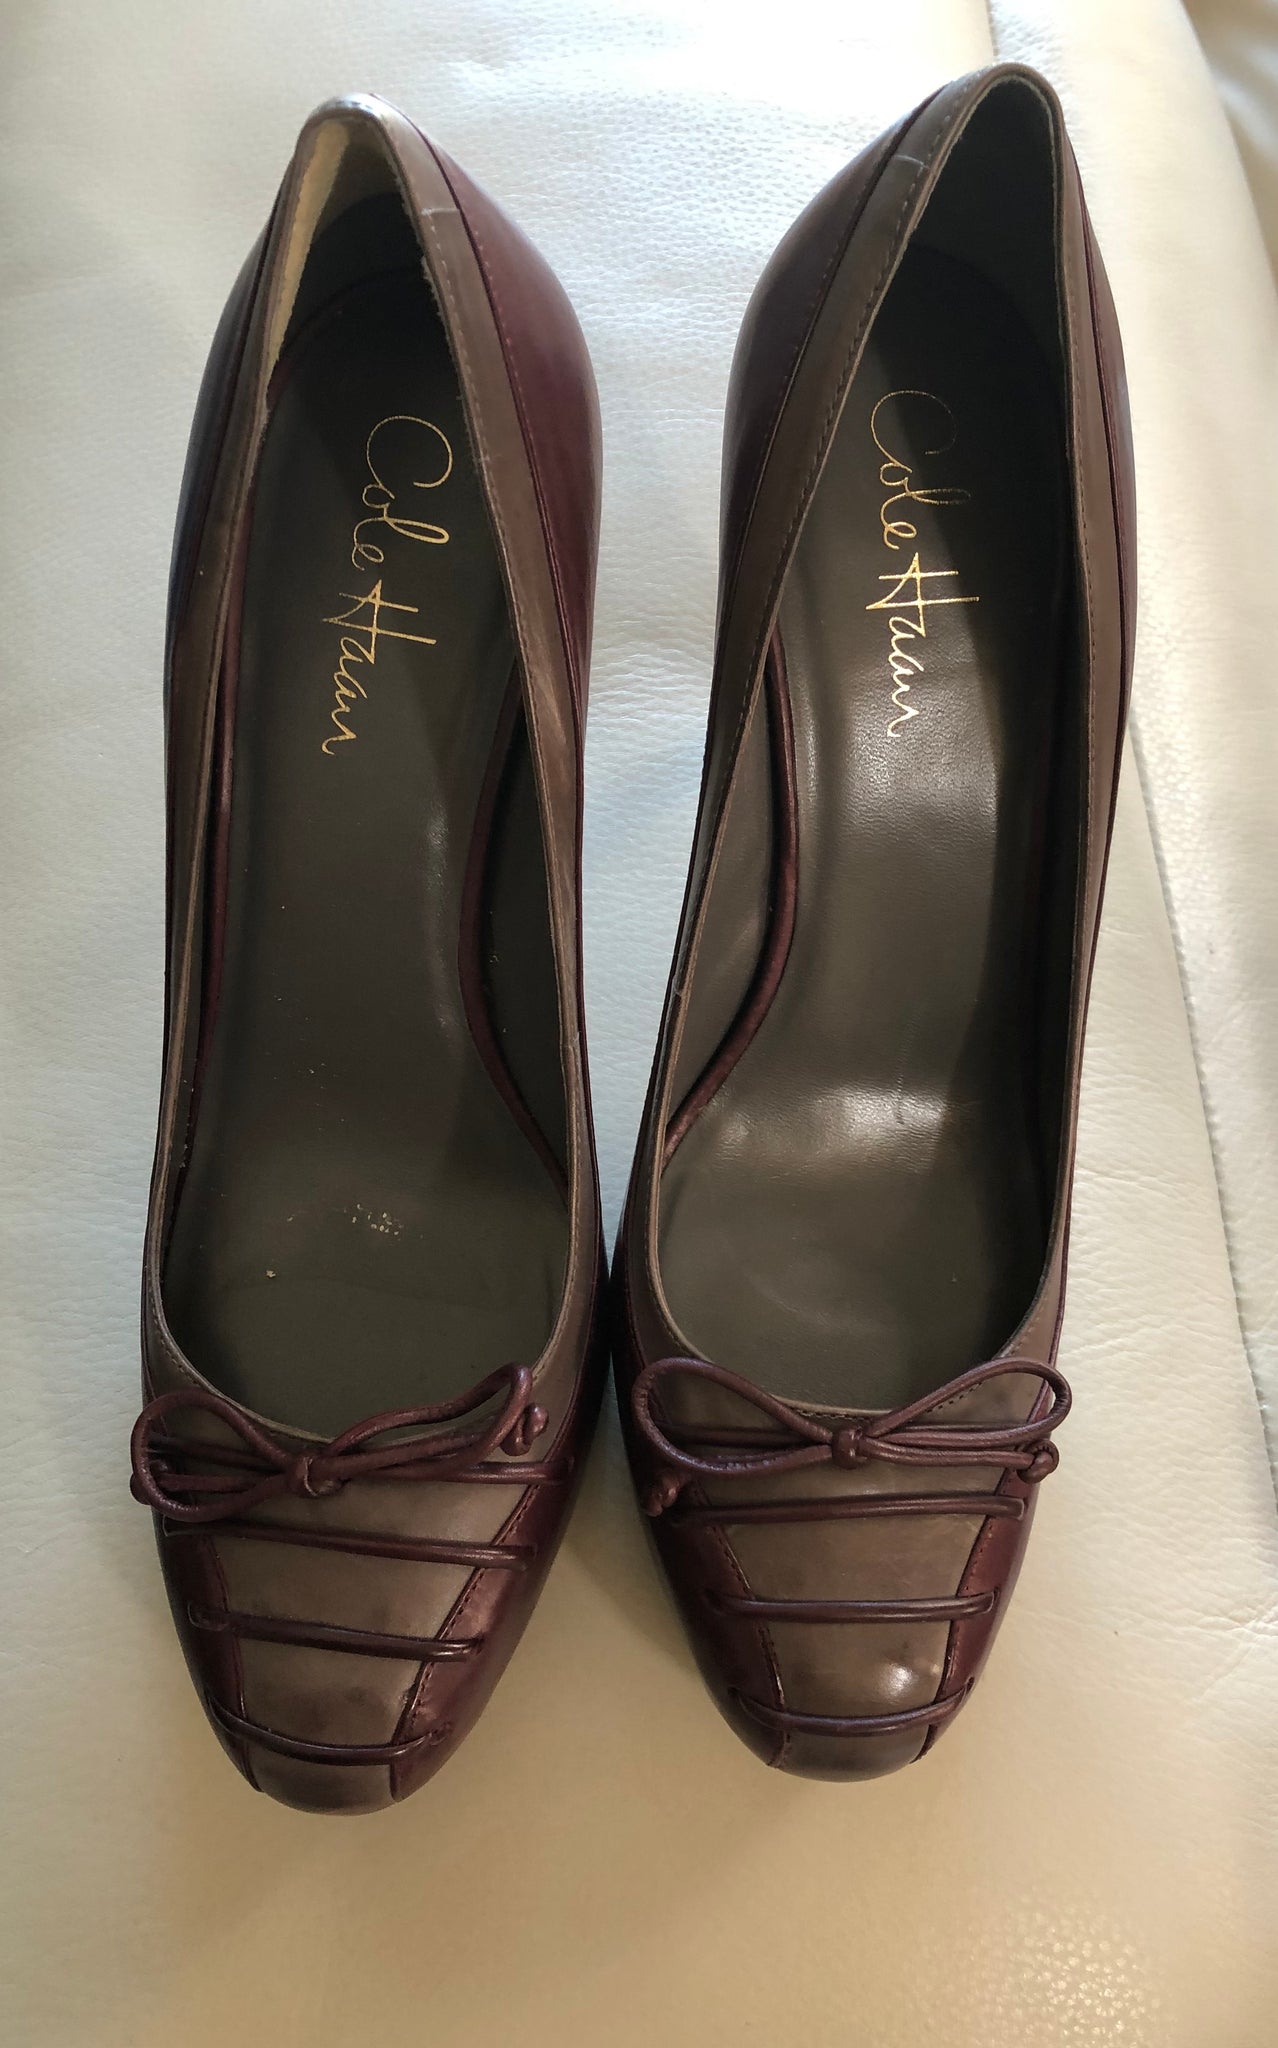 Cole Haan all leather high heel pump in Burgundy with Grey Trim